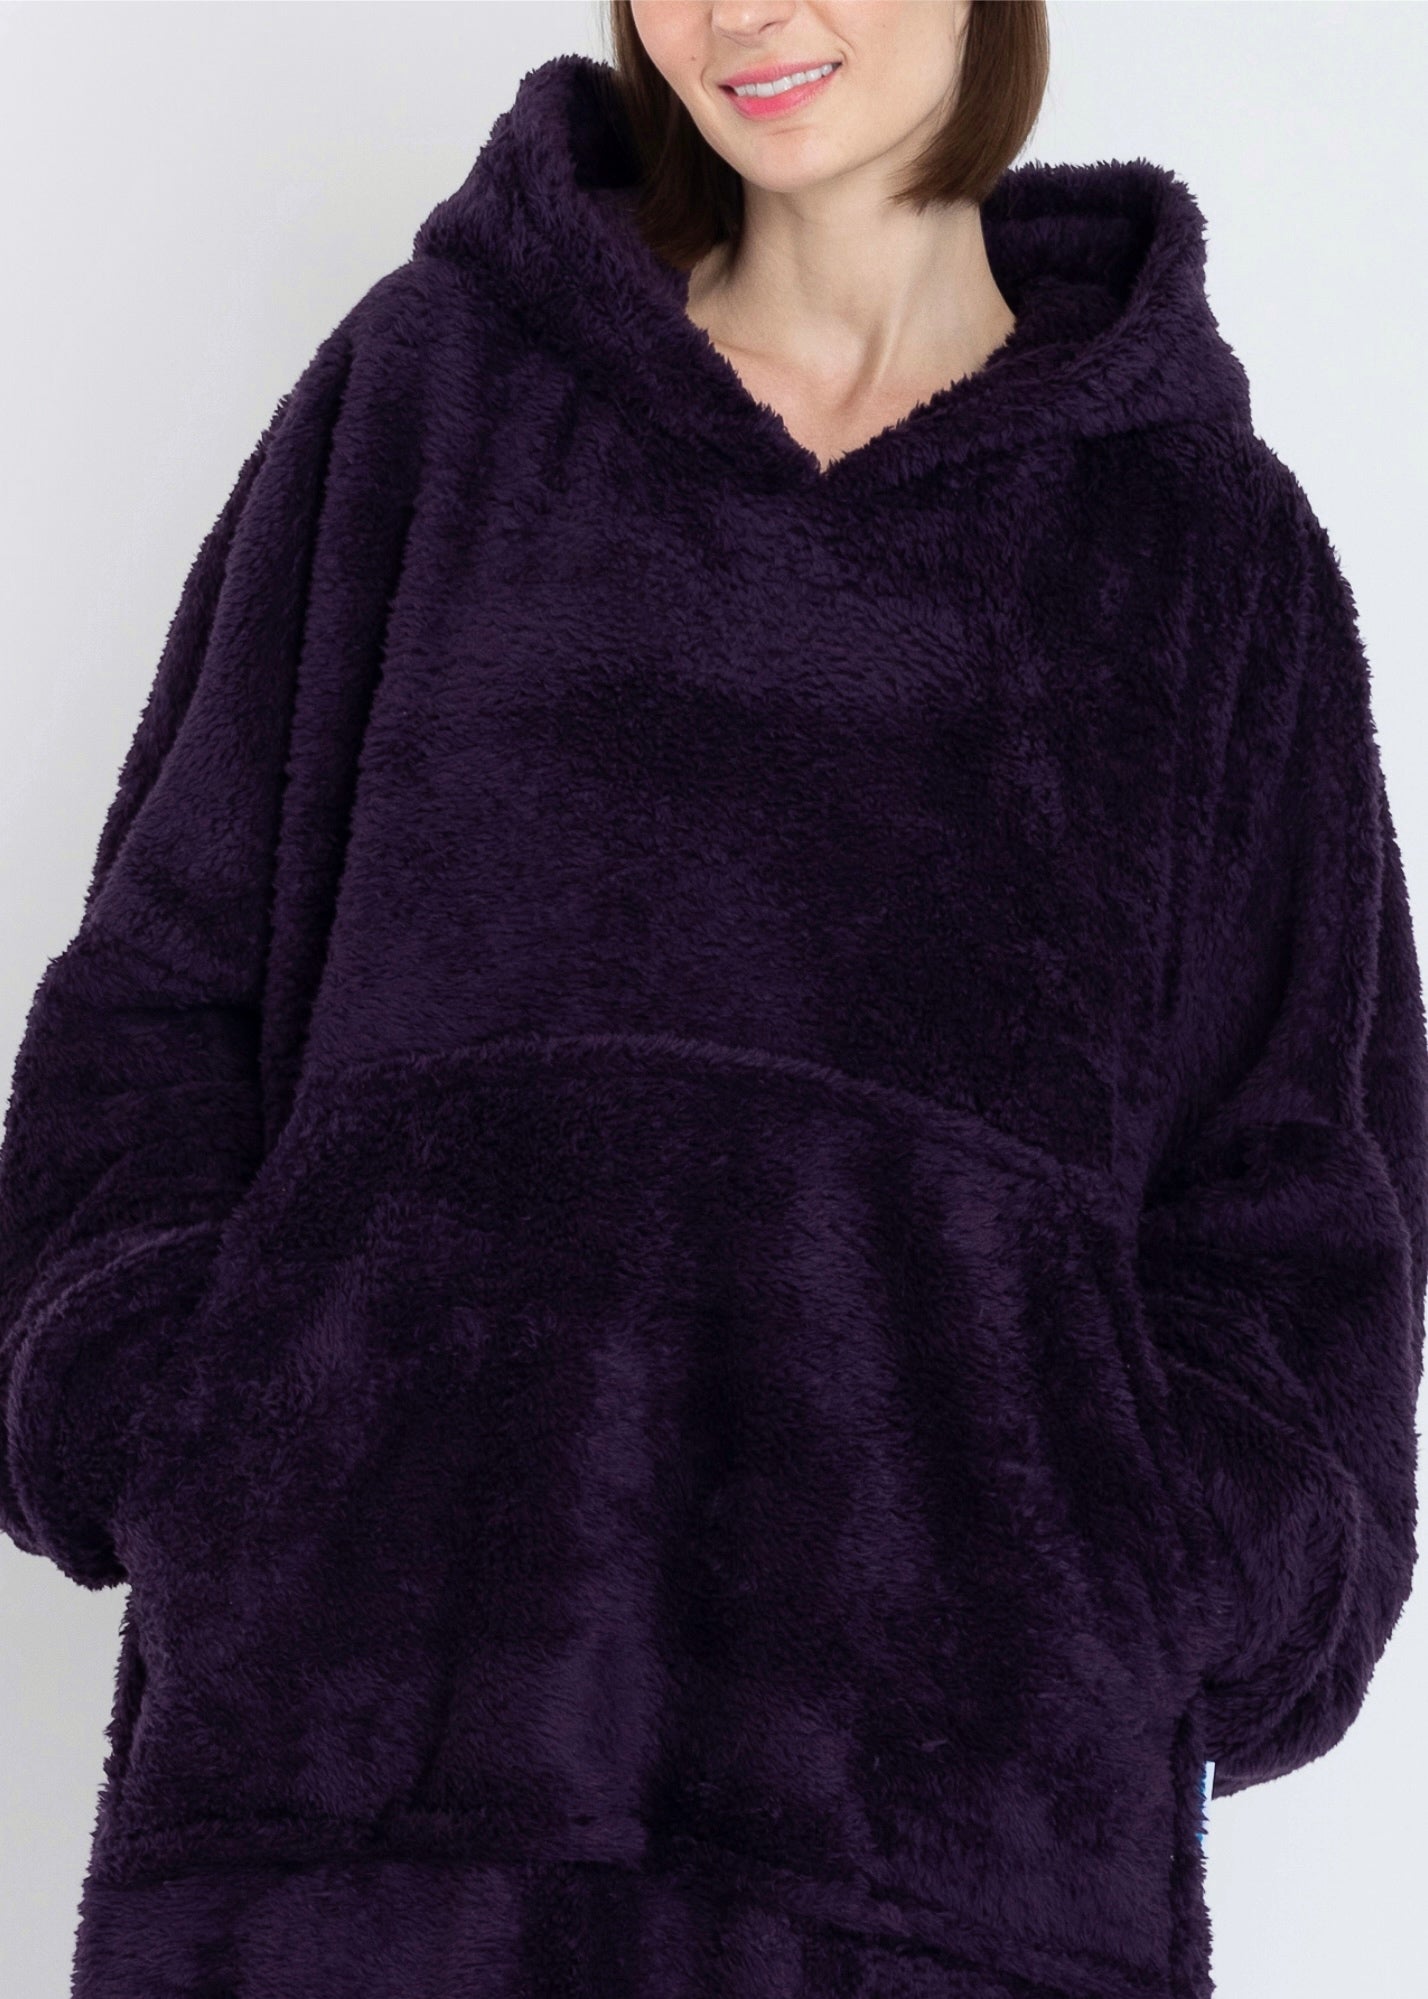 Wine Purple Cloudie® Luxe - The Cloudie Co. ultra soft cosy comfy Giant Wearable Blanket hoodie Unisex home or travel blanket hoodie travel blanket sofa blanket with sleeves hoodie blanket